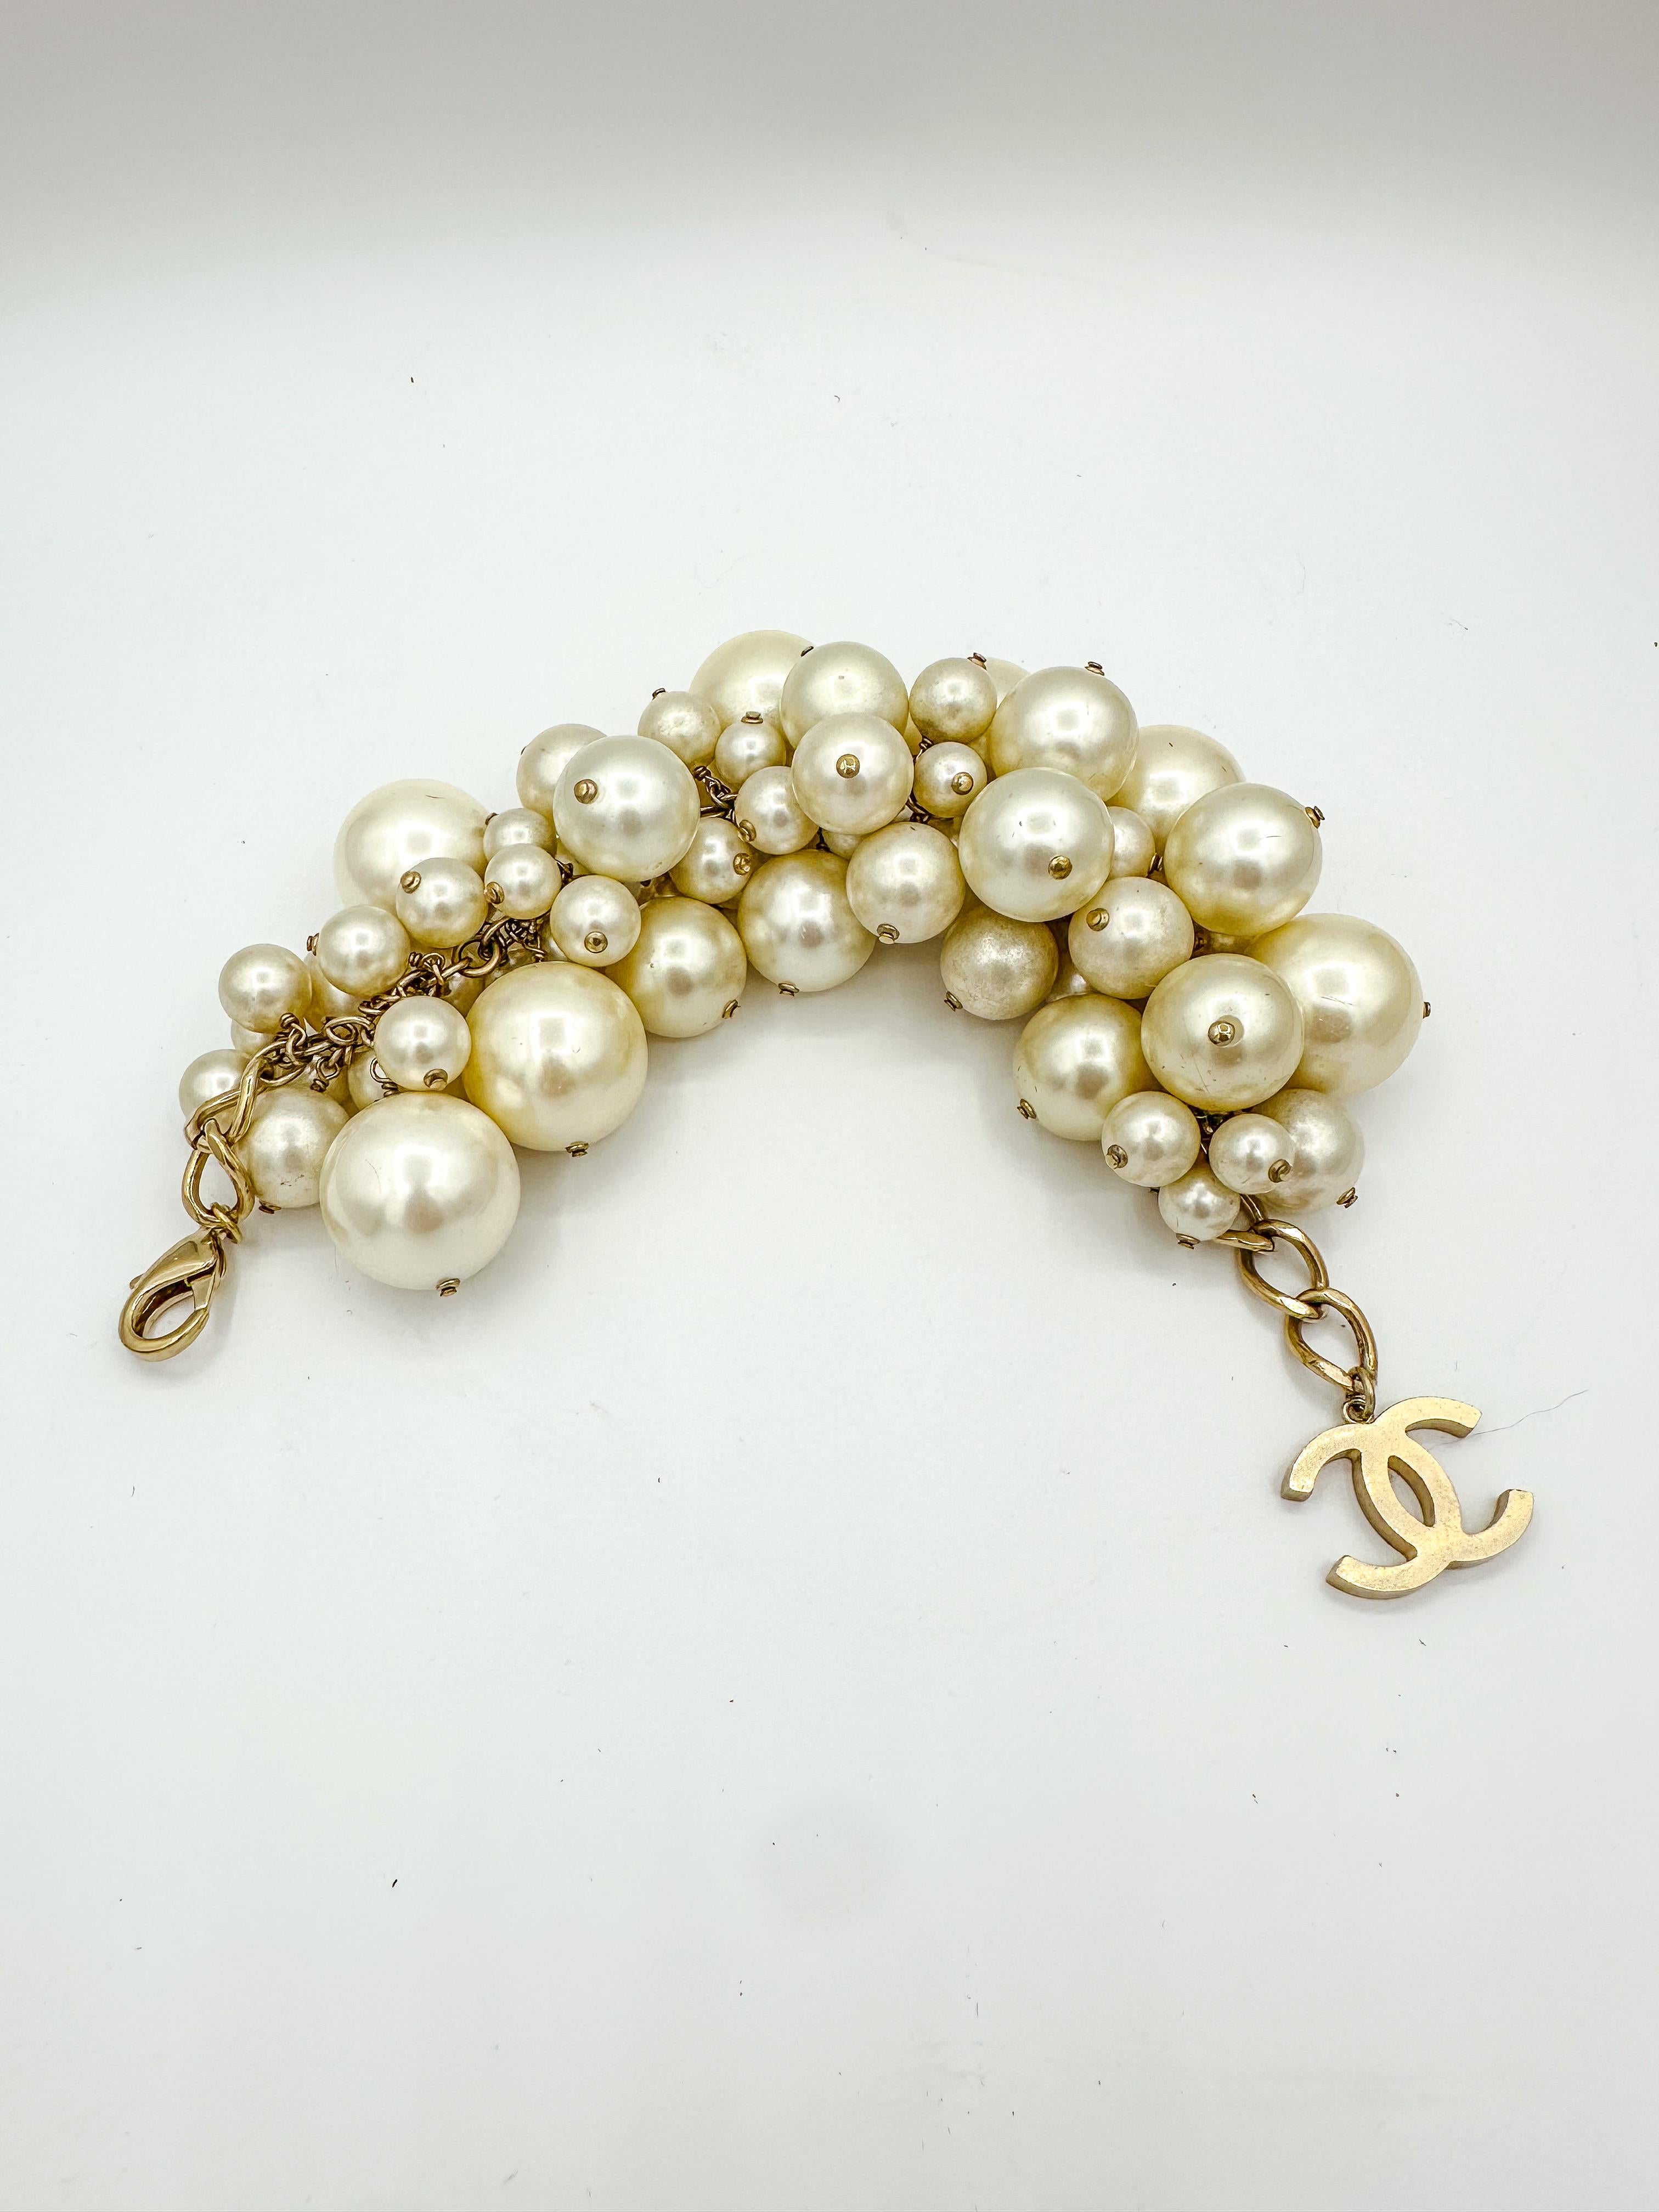 Contemporary Oversize Chanel Spring 2013 Runway Pearl Cluster Bracelet For Sale